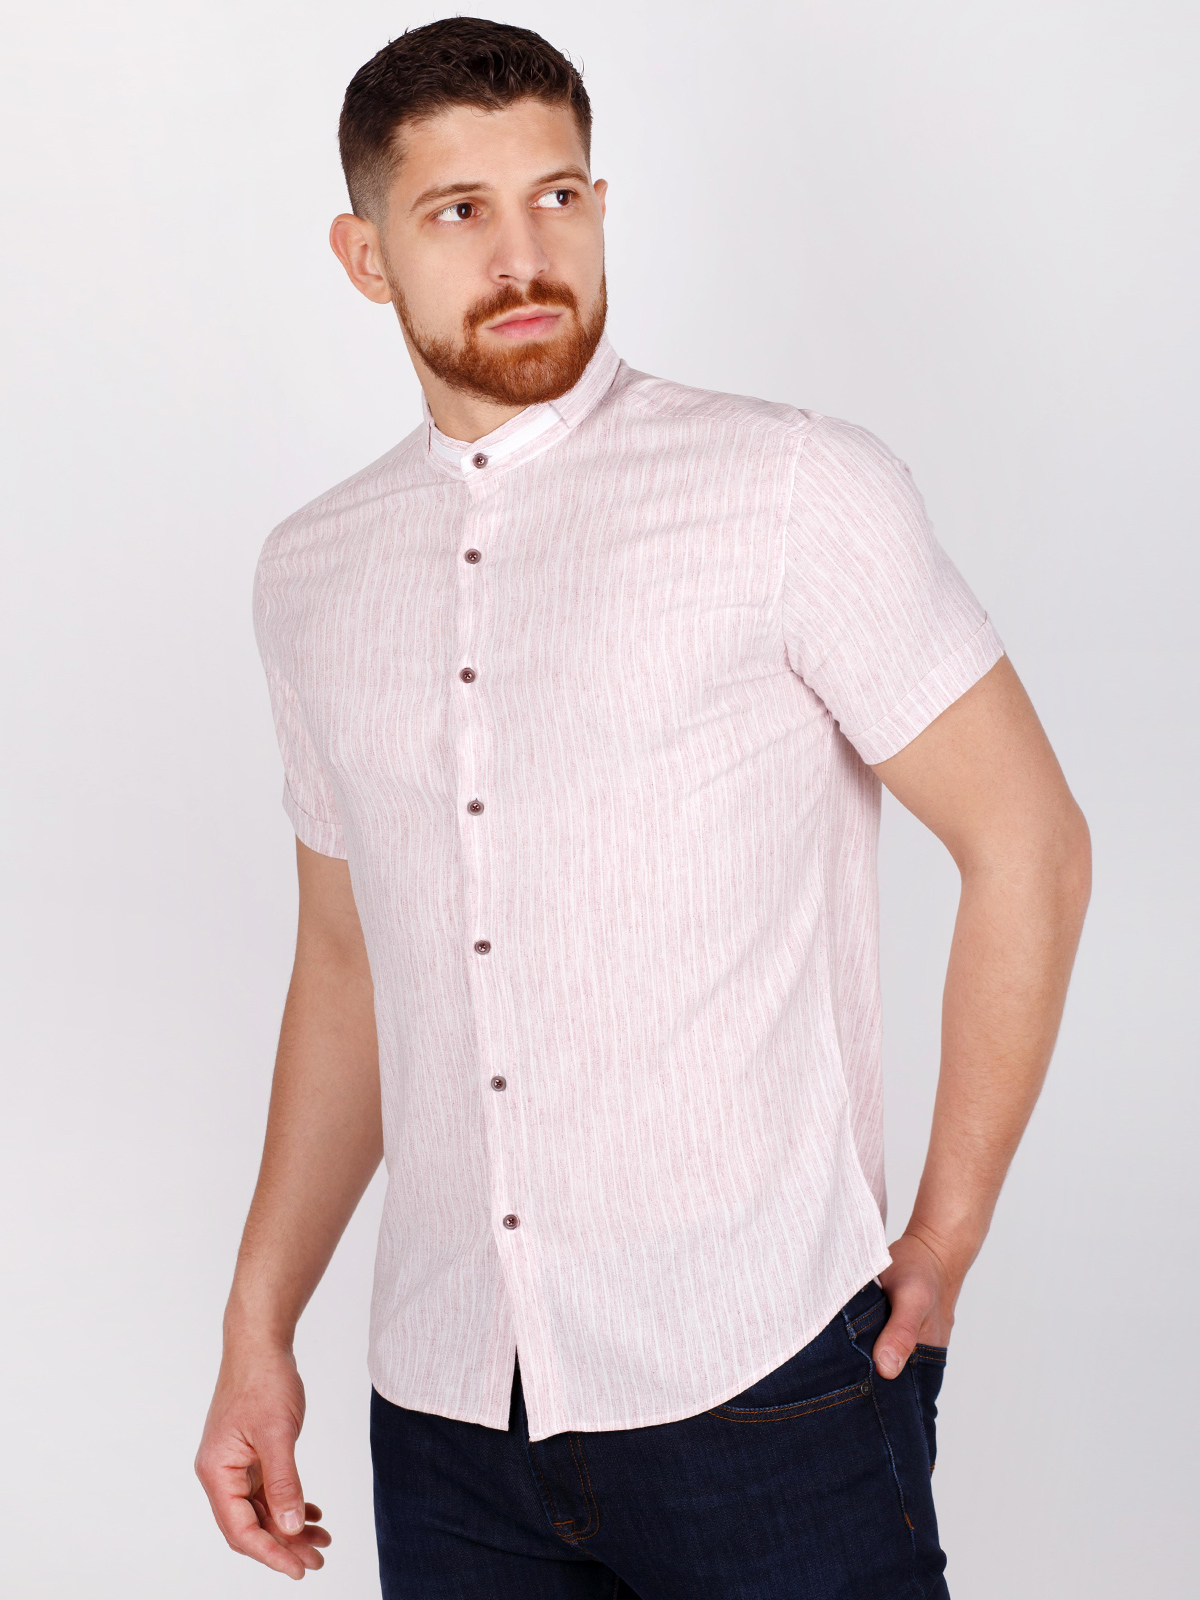 Pale pink and white striped shirt - 80223 € 16.31 img2